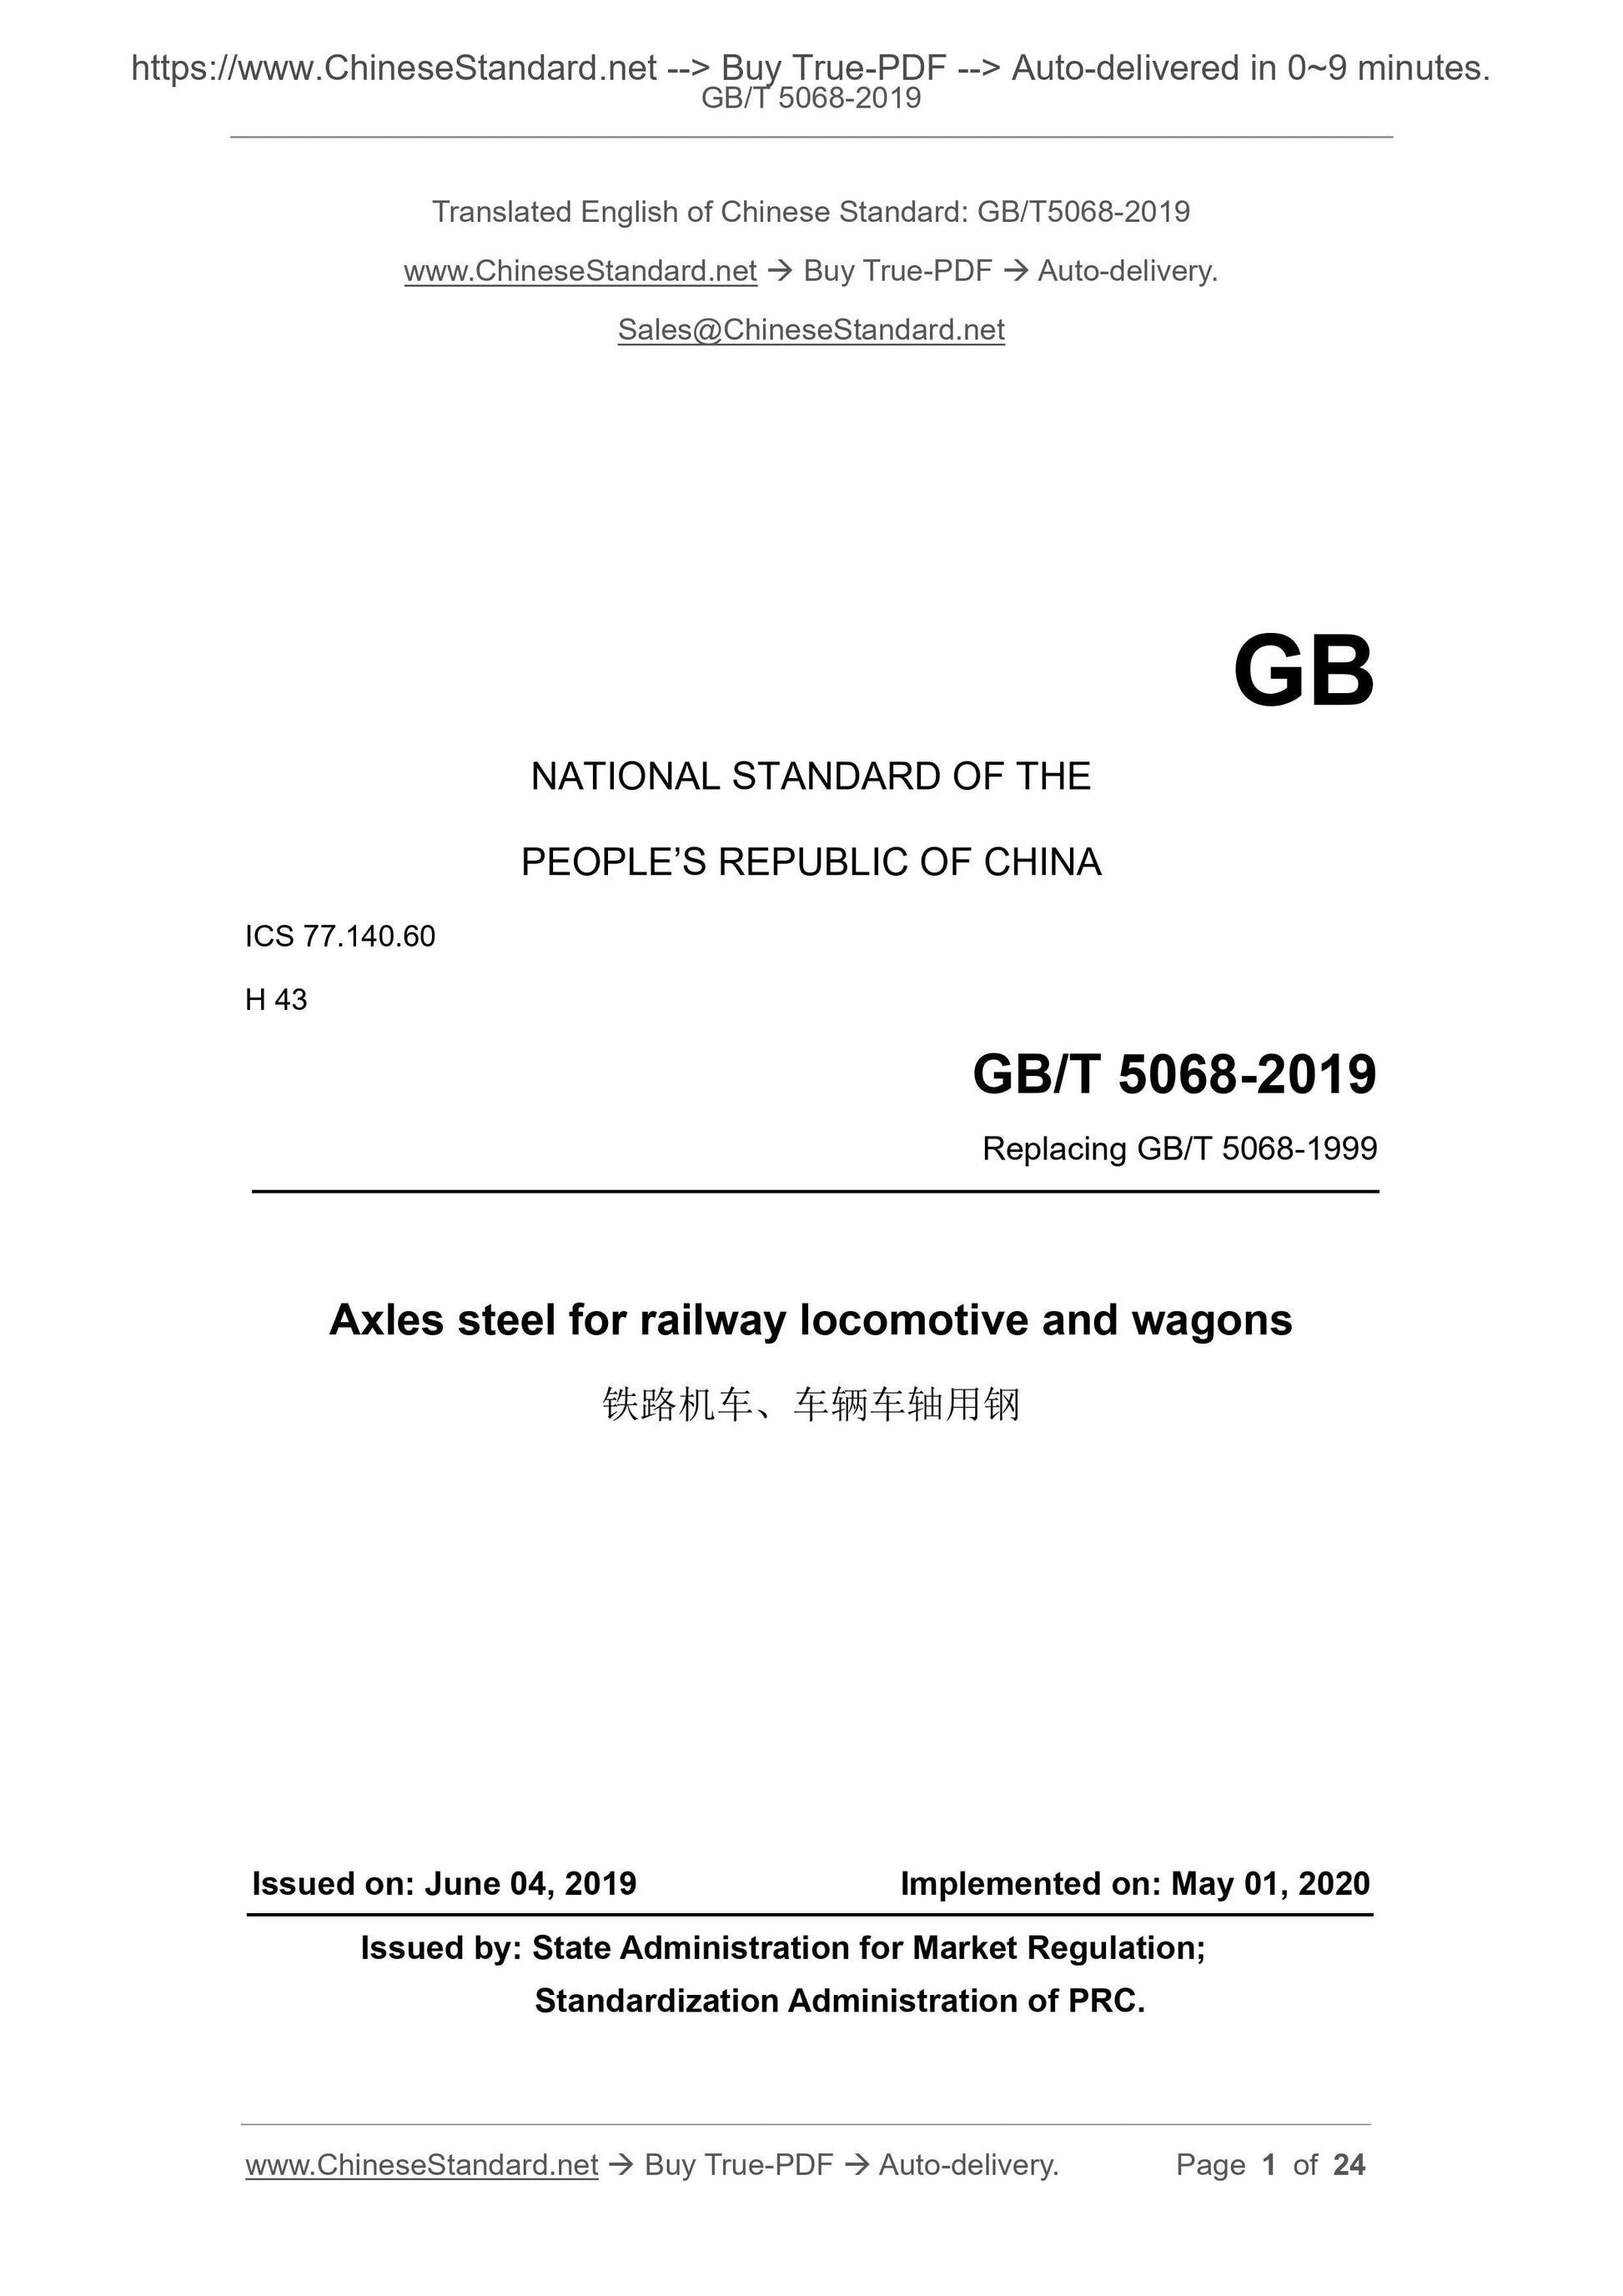 GB/T 5068-2019 Page 1